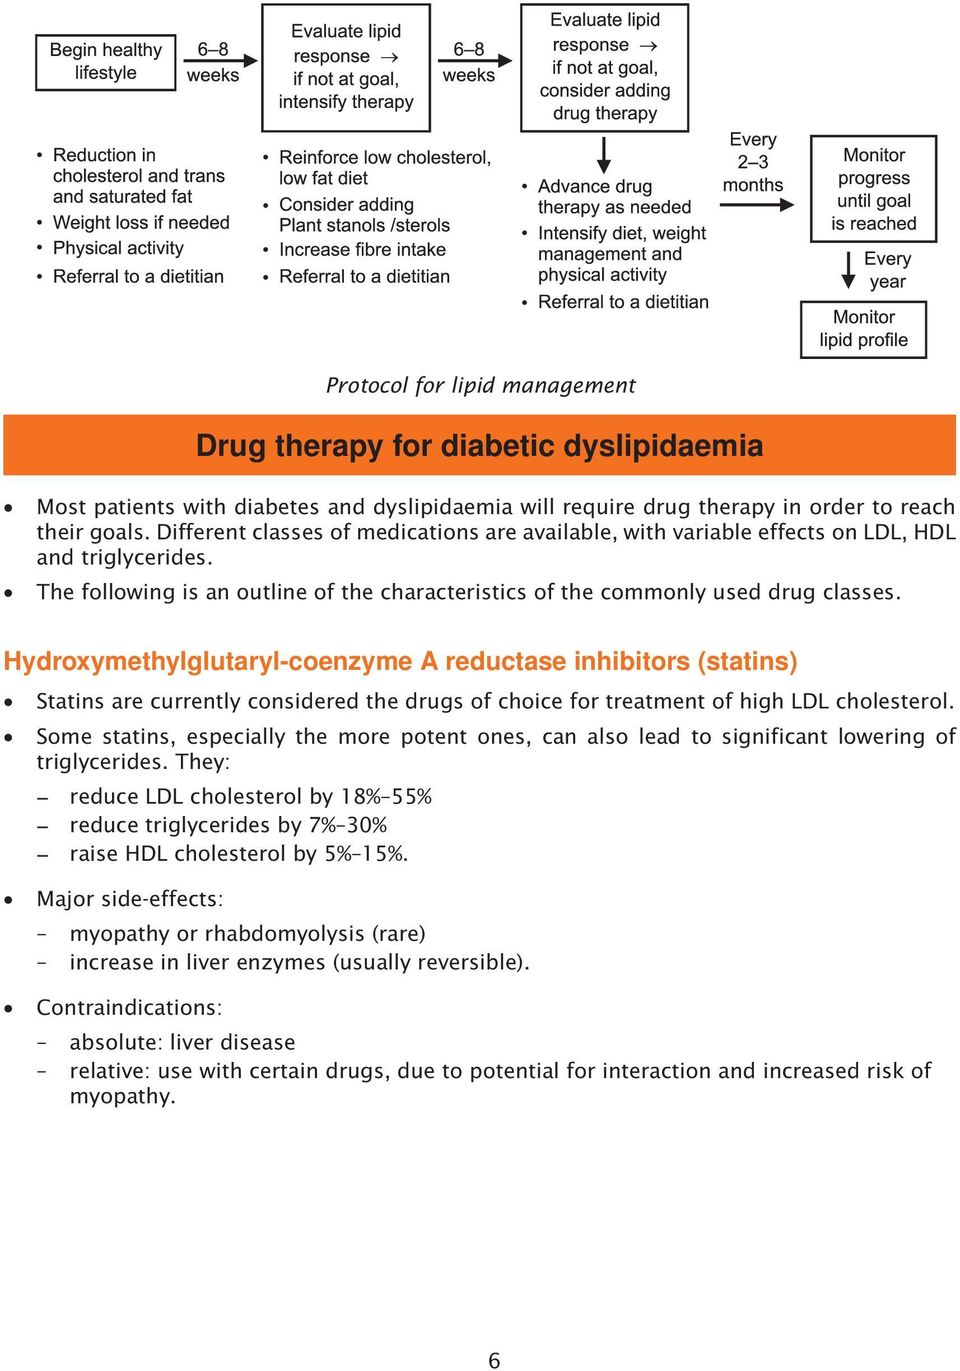 Hydroxymethylglutaryl-coenzyme A reductase inhibitors (statins) Statins are currently considered the drugs of choice for treatment of high LDL cholesterol.